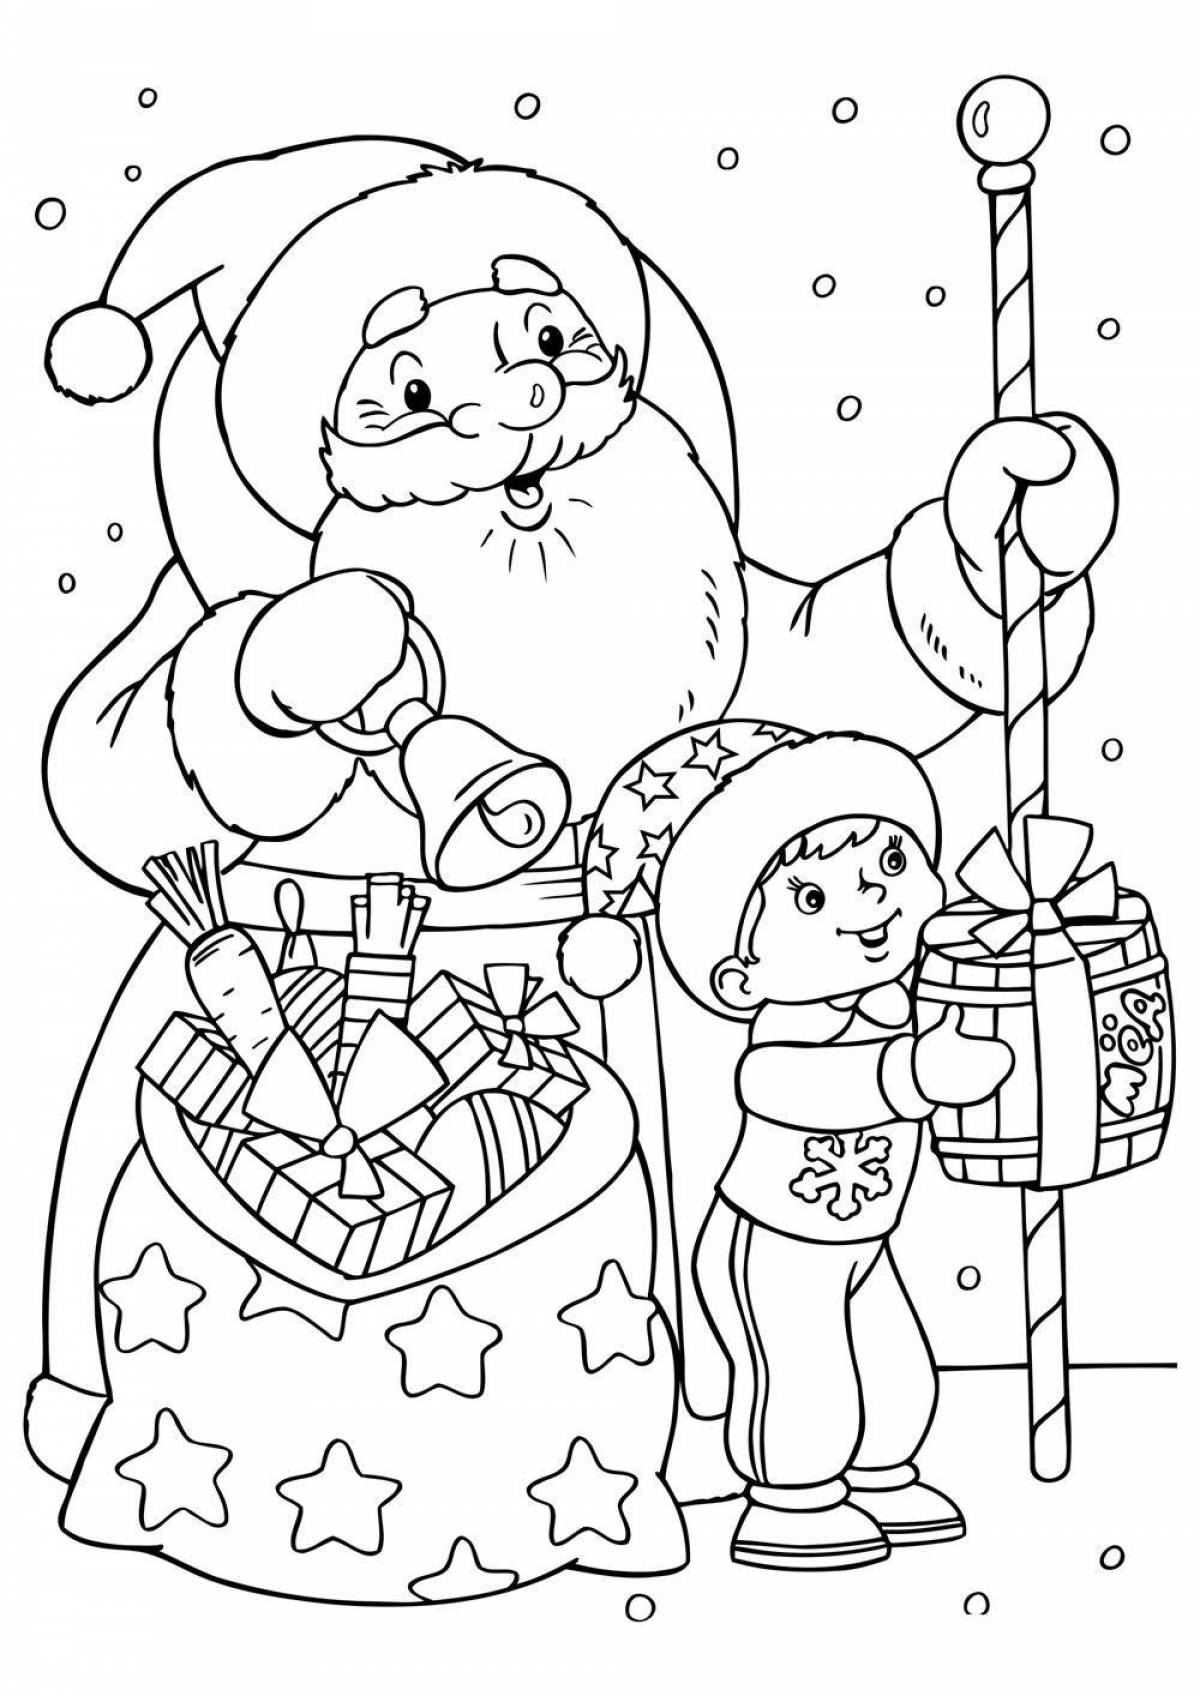 Cute santa claus coloring book for 2-3 year olds